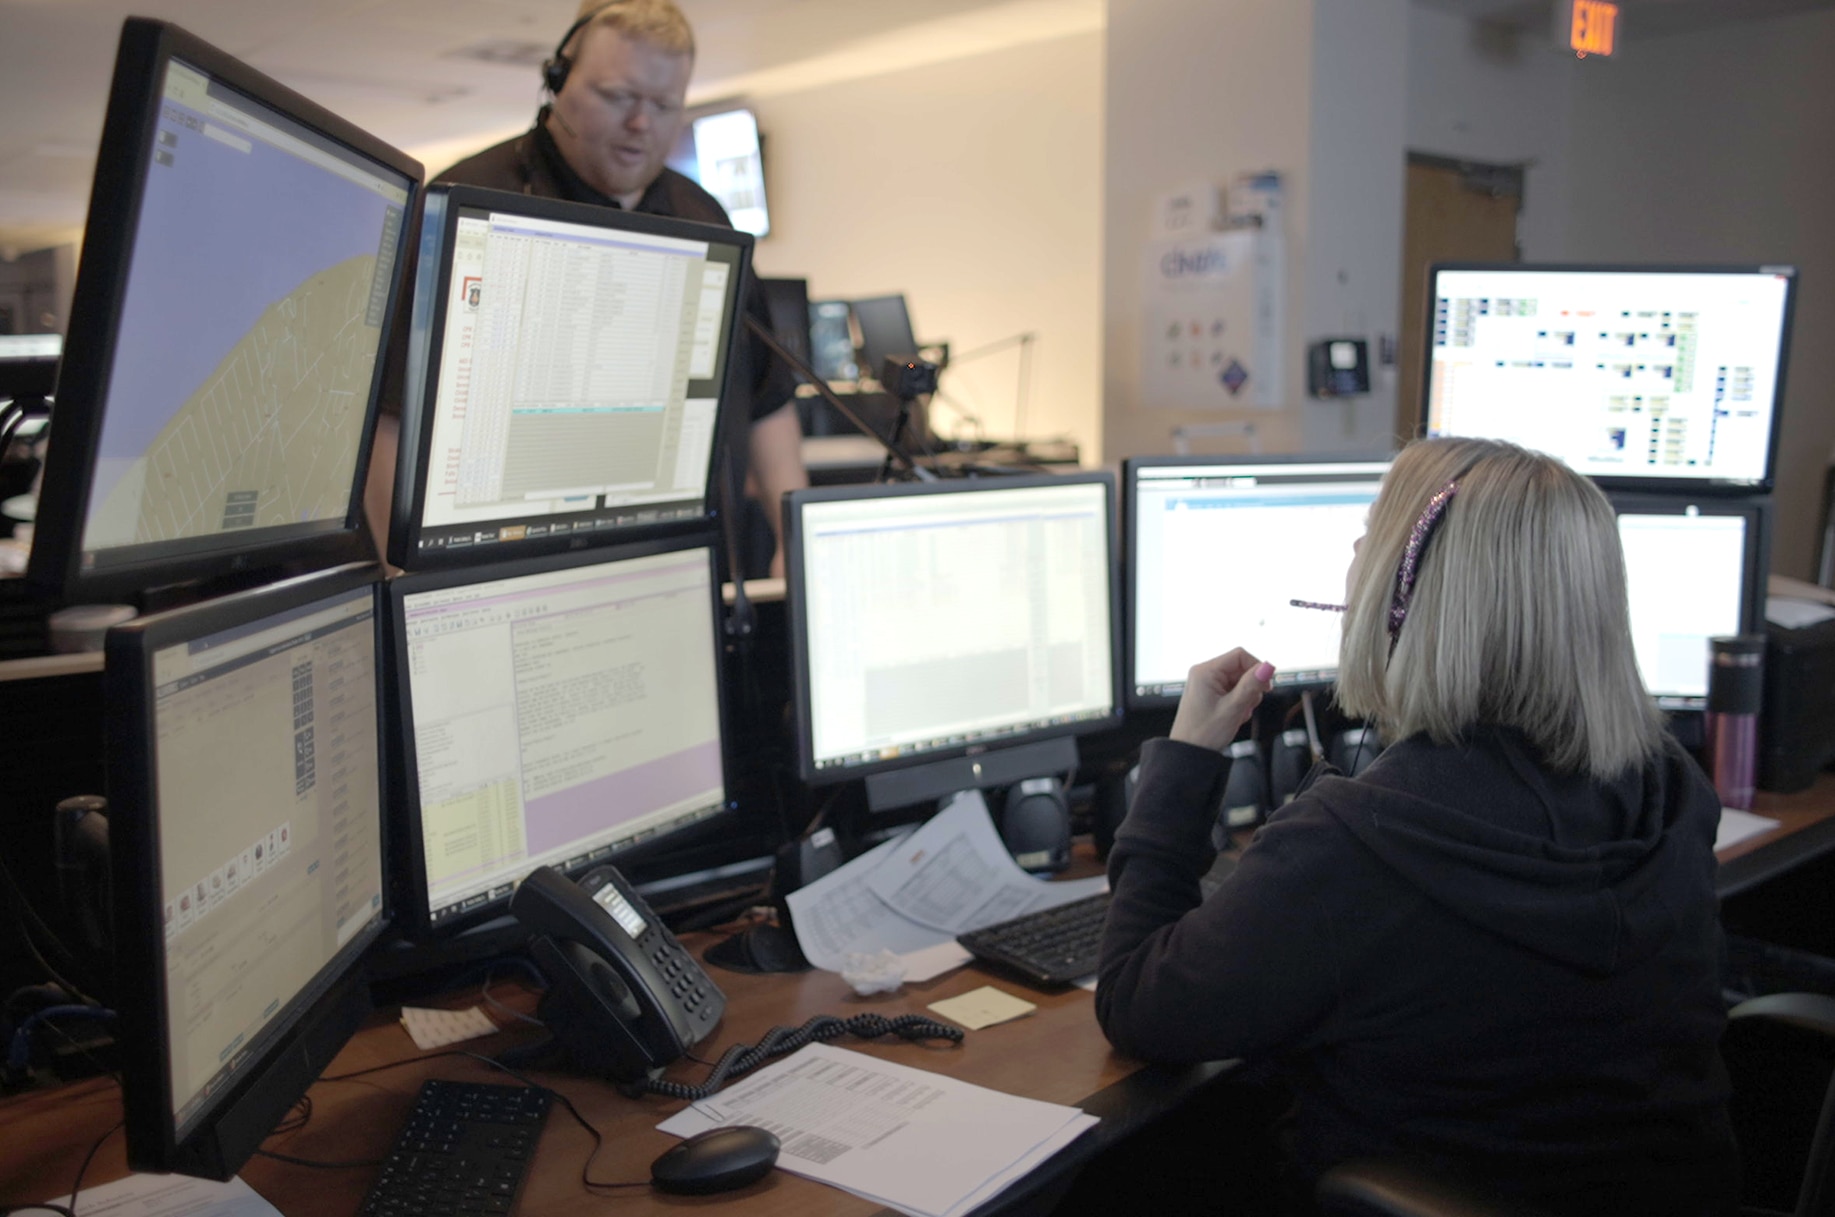 Emergency dispatchers featured in 911 Crisis Center